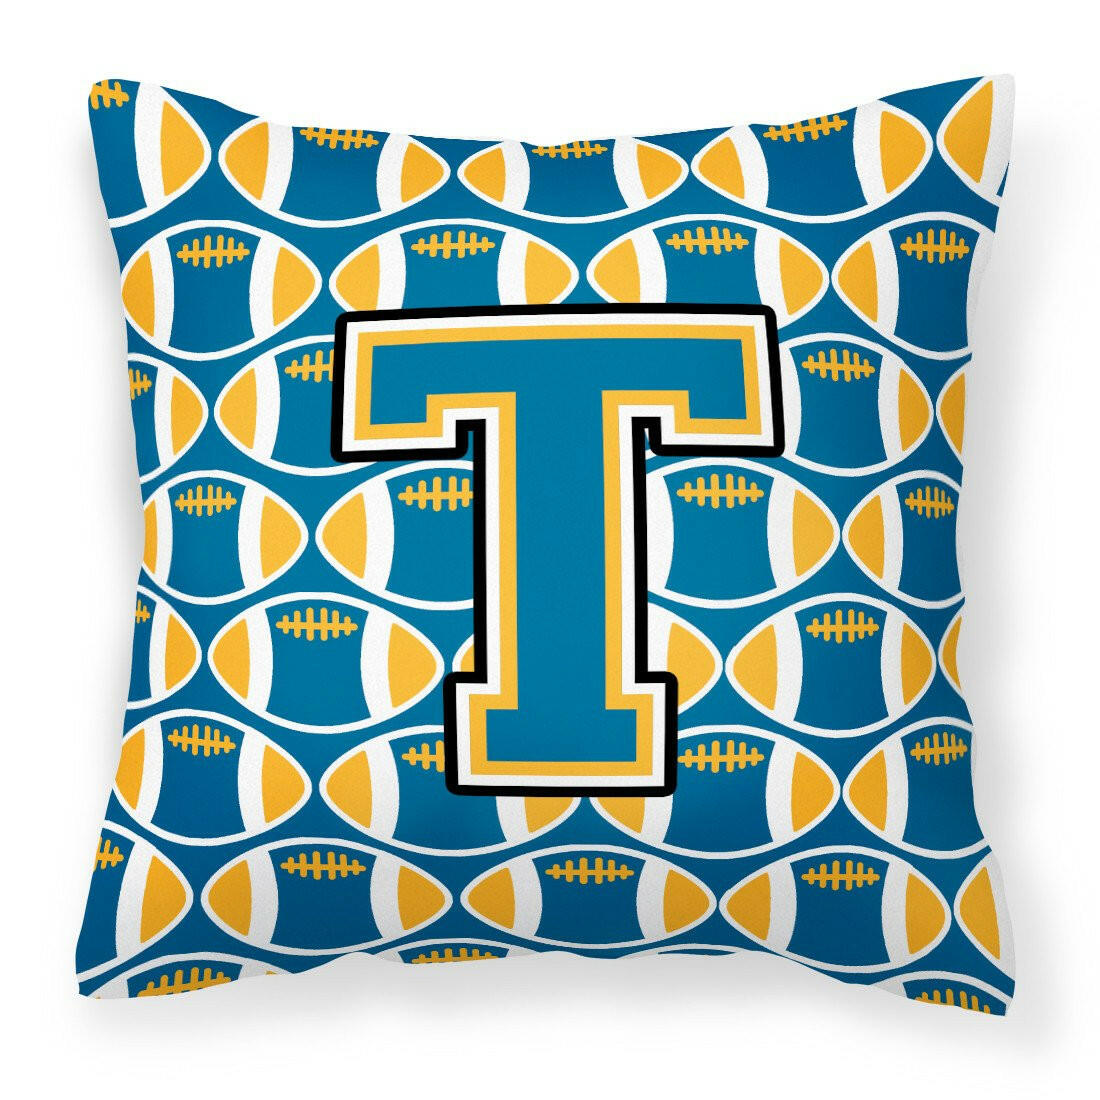 Letter T Football Blue and Gold Fabric Decorative Pillow CJ1077-TPW1414 by Caroline's Treasures